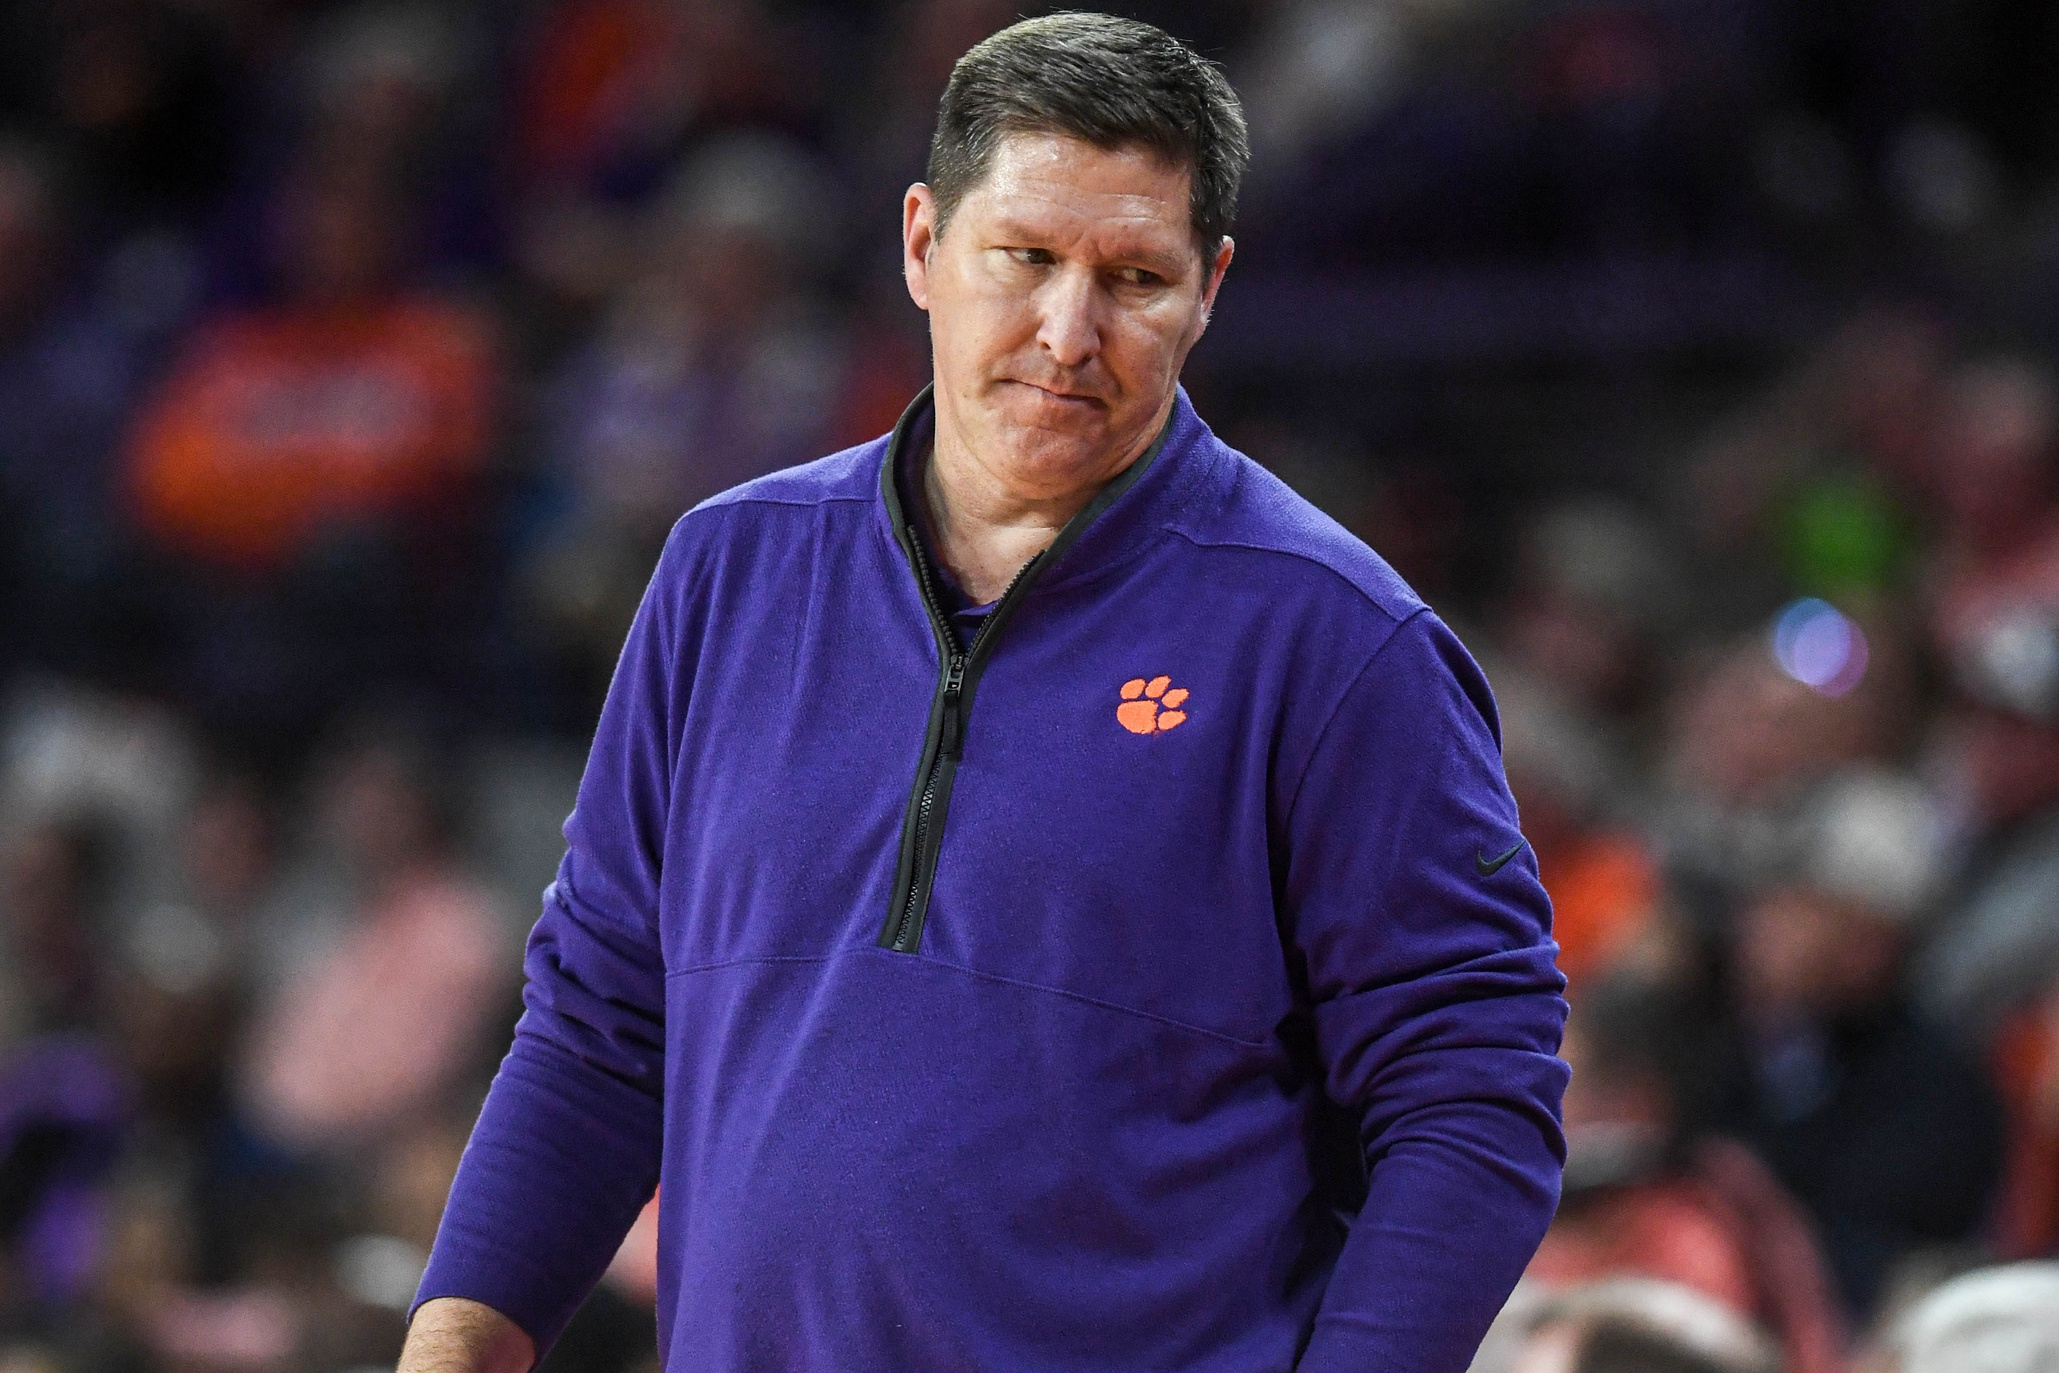 Are Clemson fans done with Brad Brownwell?